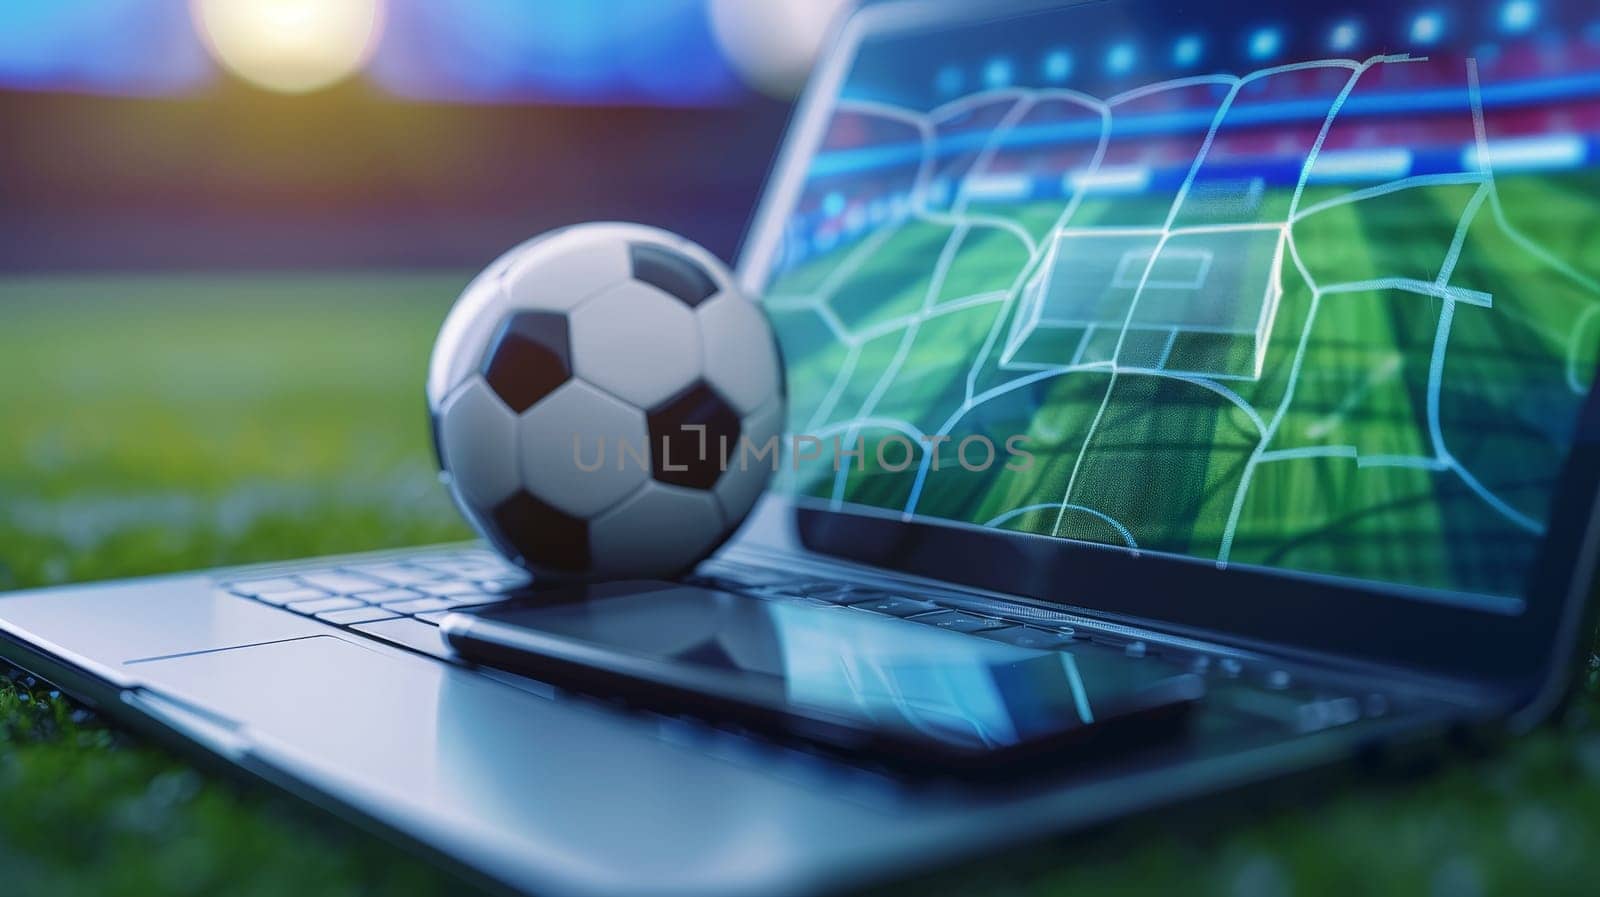 Interactive Sport Betting Online Banner with Soccer Theme on Mobile Phone and Laptop Display.